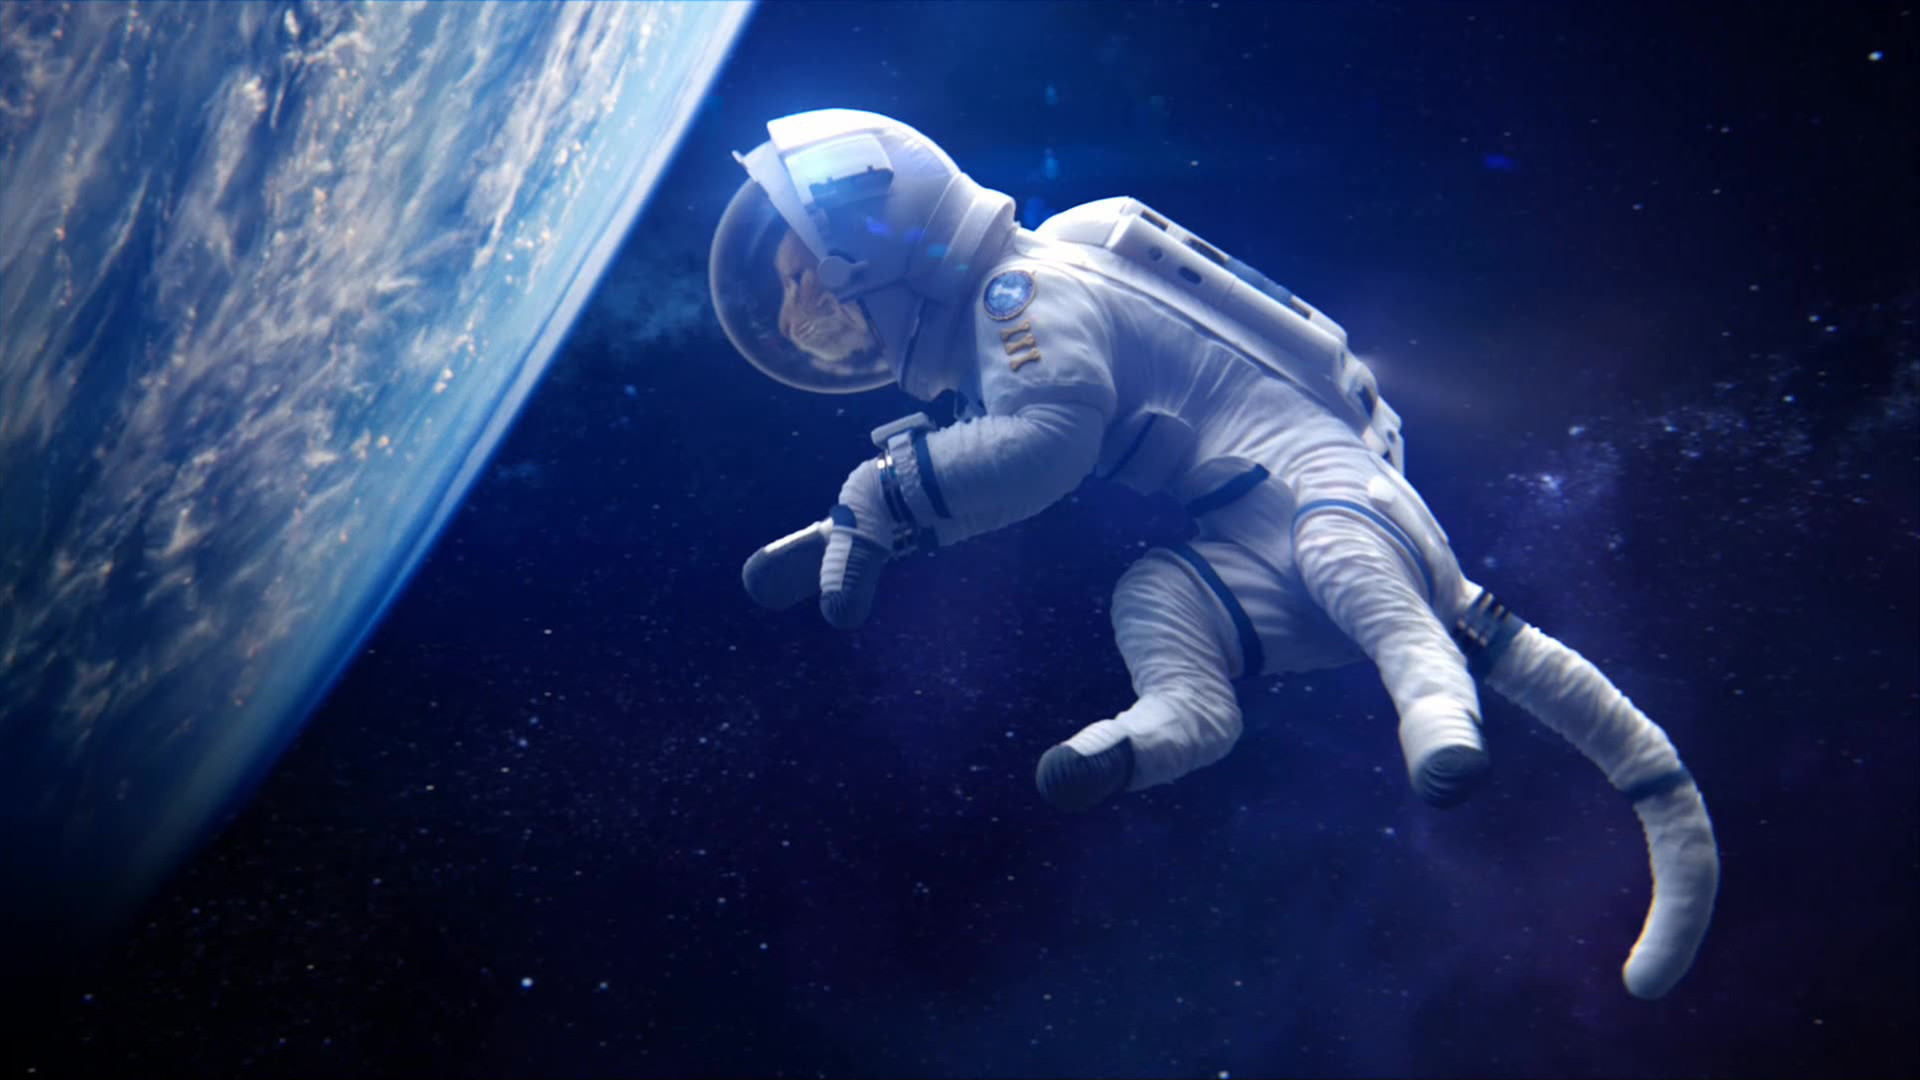 1920x1080 images of cat in space suit - #spacehero